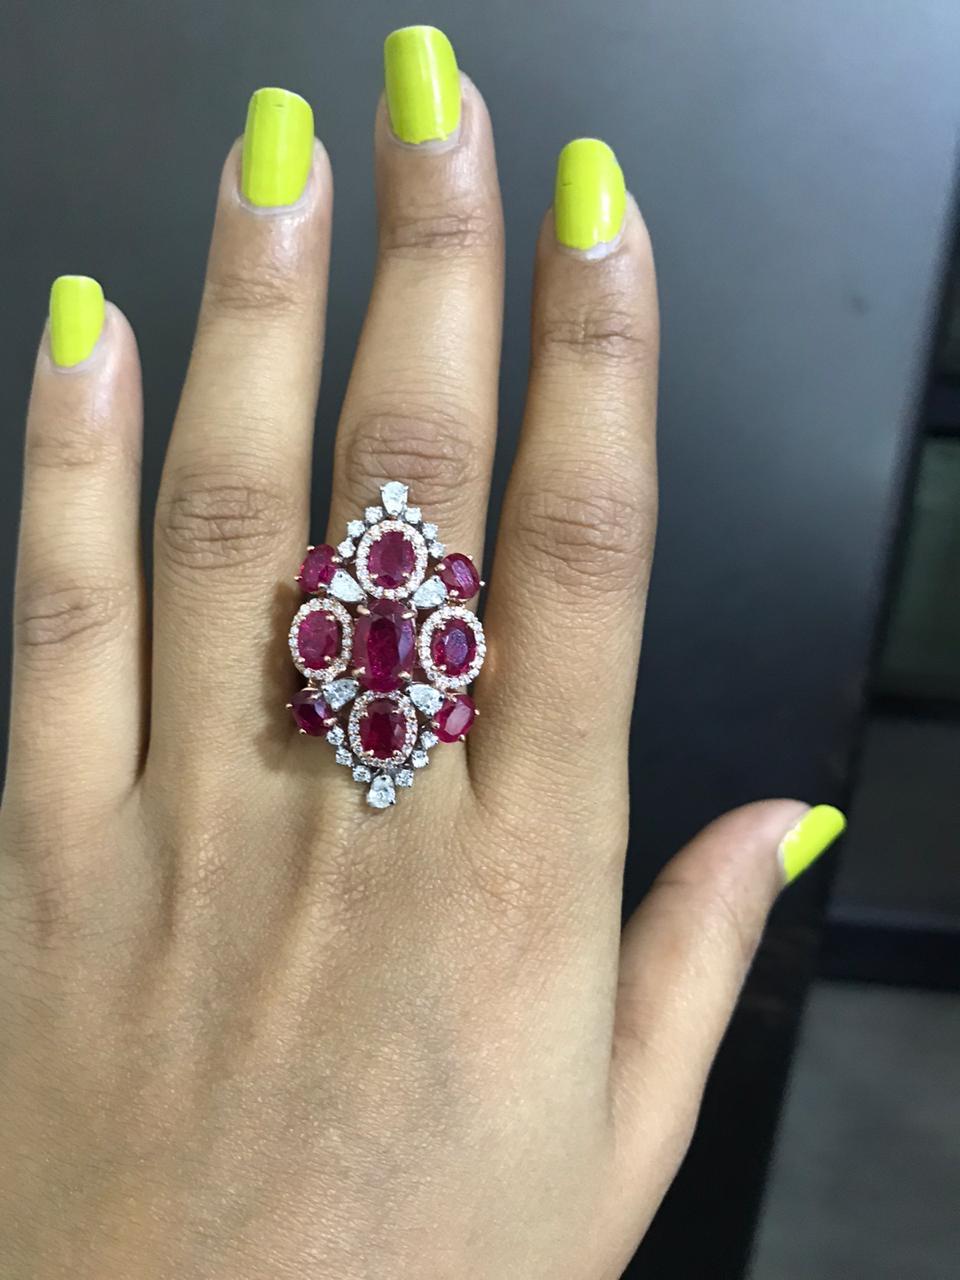 A very beautiful Mozambique Ruby & Diamonds Cocktail Ring set in 18K Rose gold. The combined weight of the Rubies is 6.10 carats. The Rubies are completely natural, no-heat and without any treatment. The Rubies originate from Mozambique, Africa. The